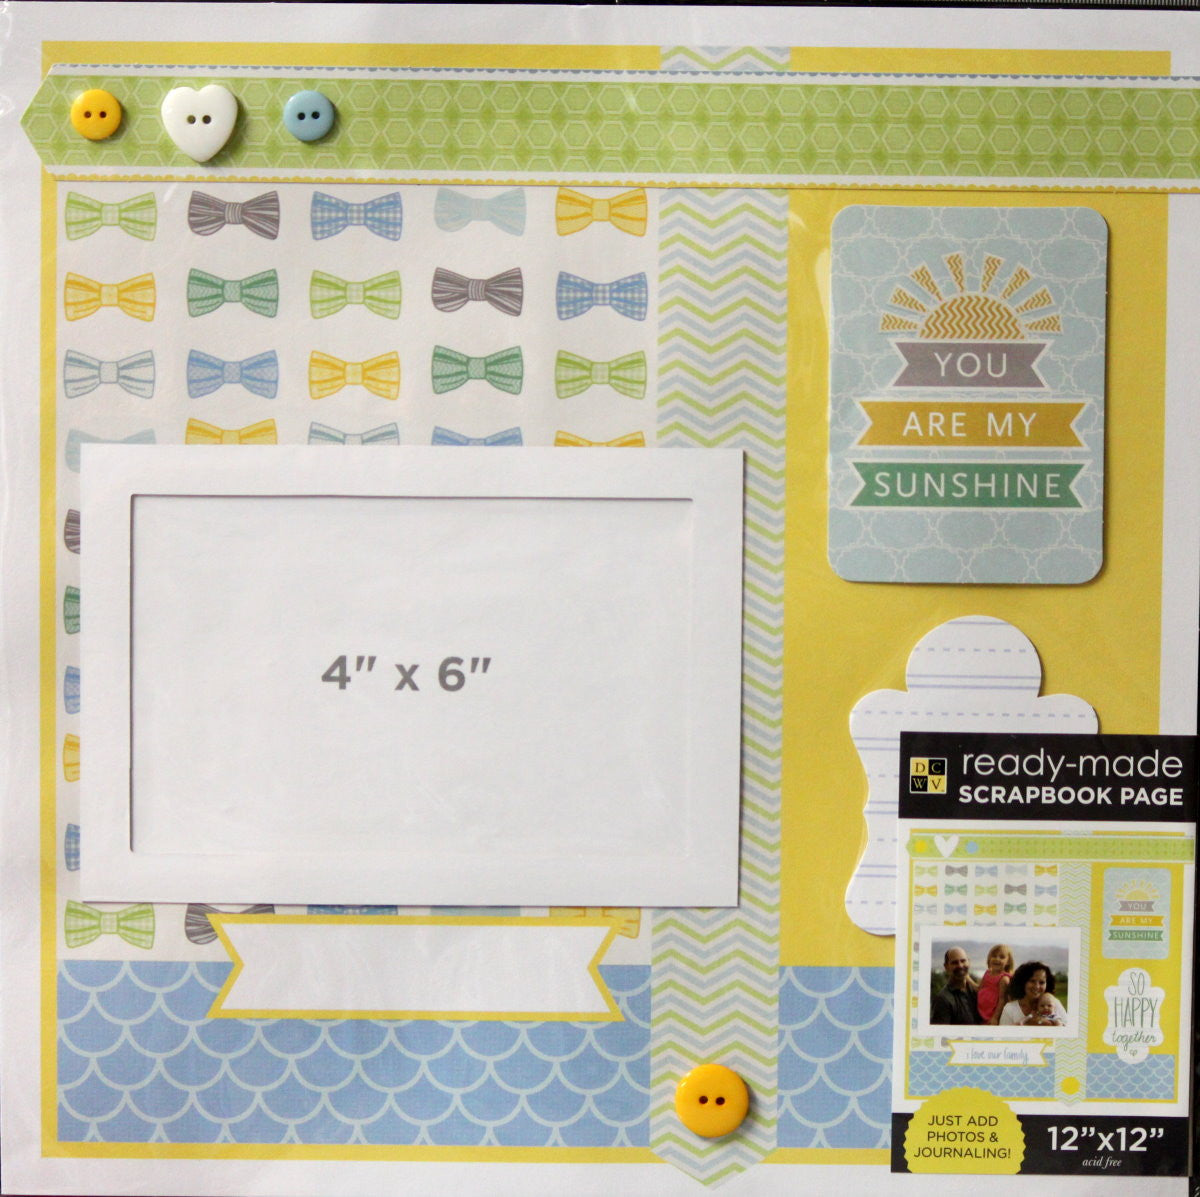 DCWV 12 x 12 Your Are My Sunshine Ready-Made Scrapbook Page - SCRAPBOOKFARE